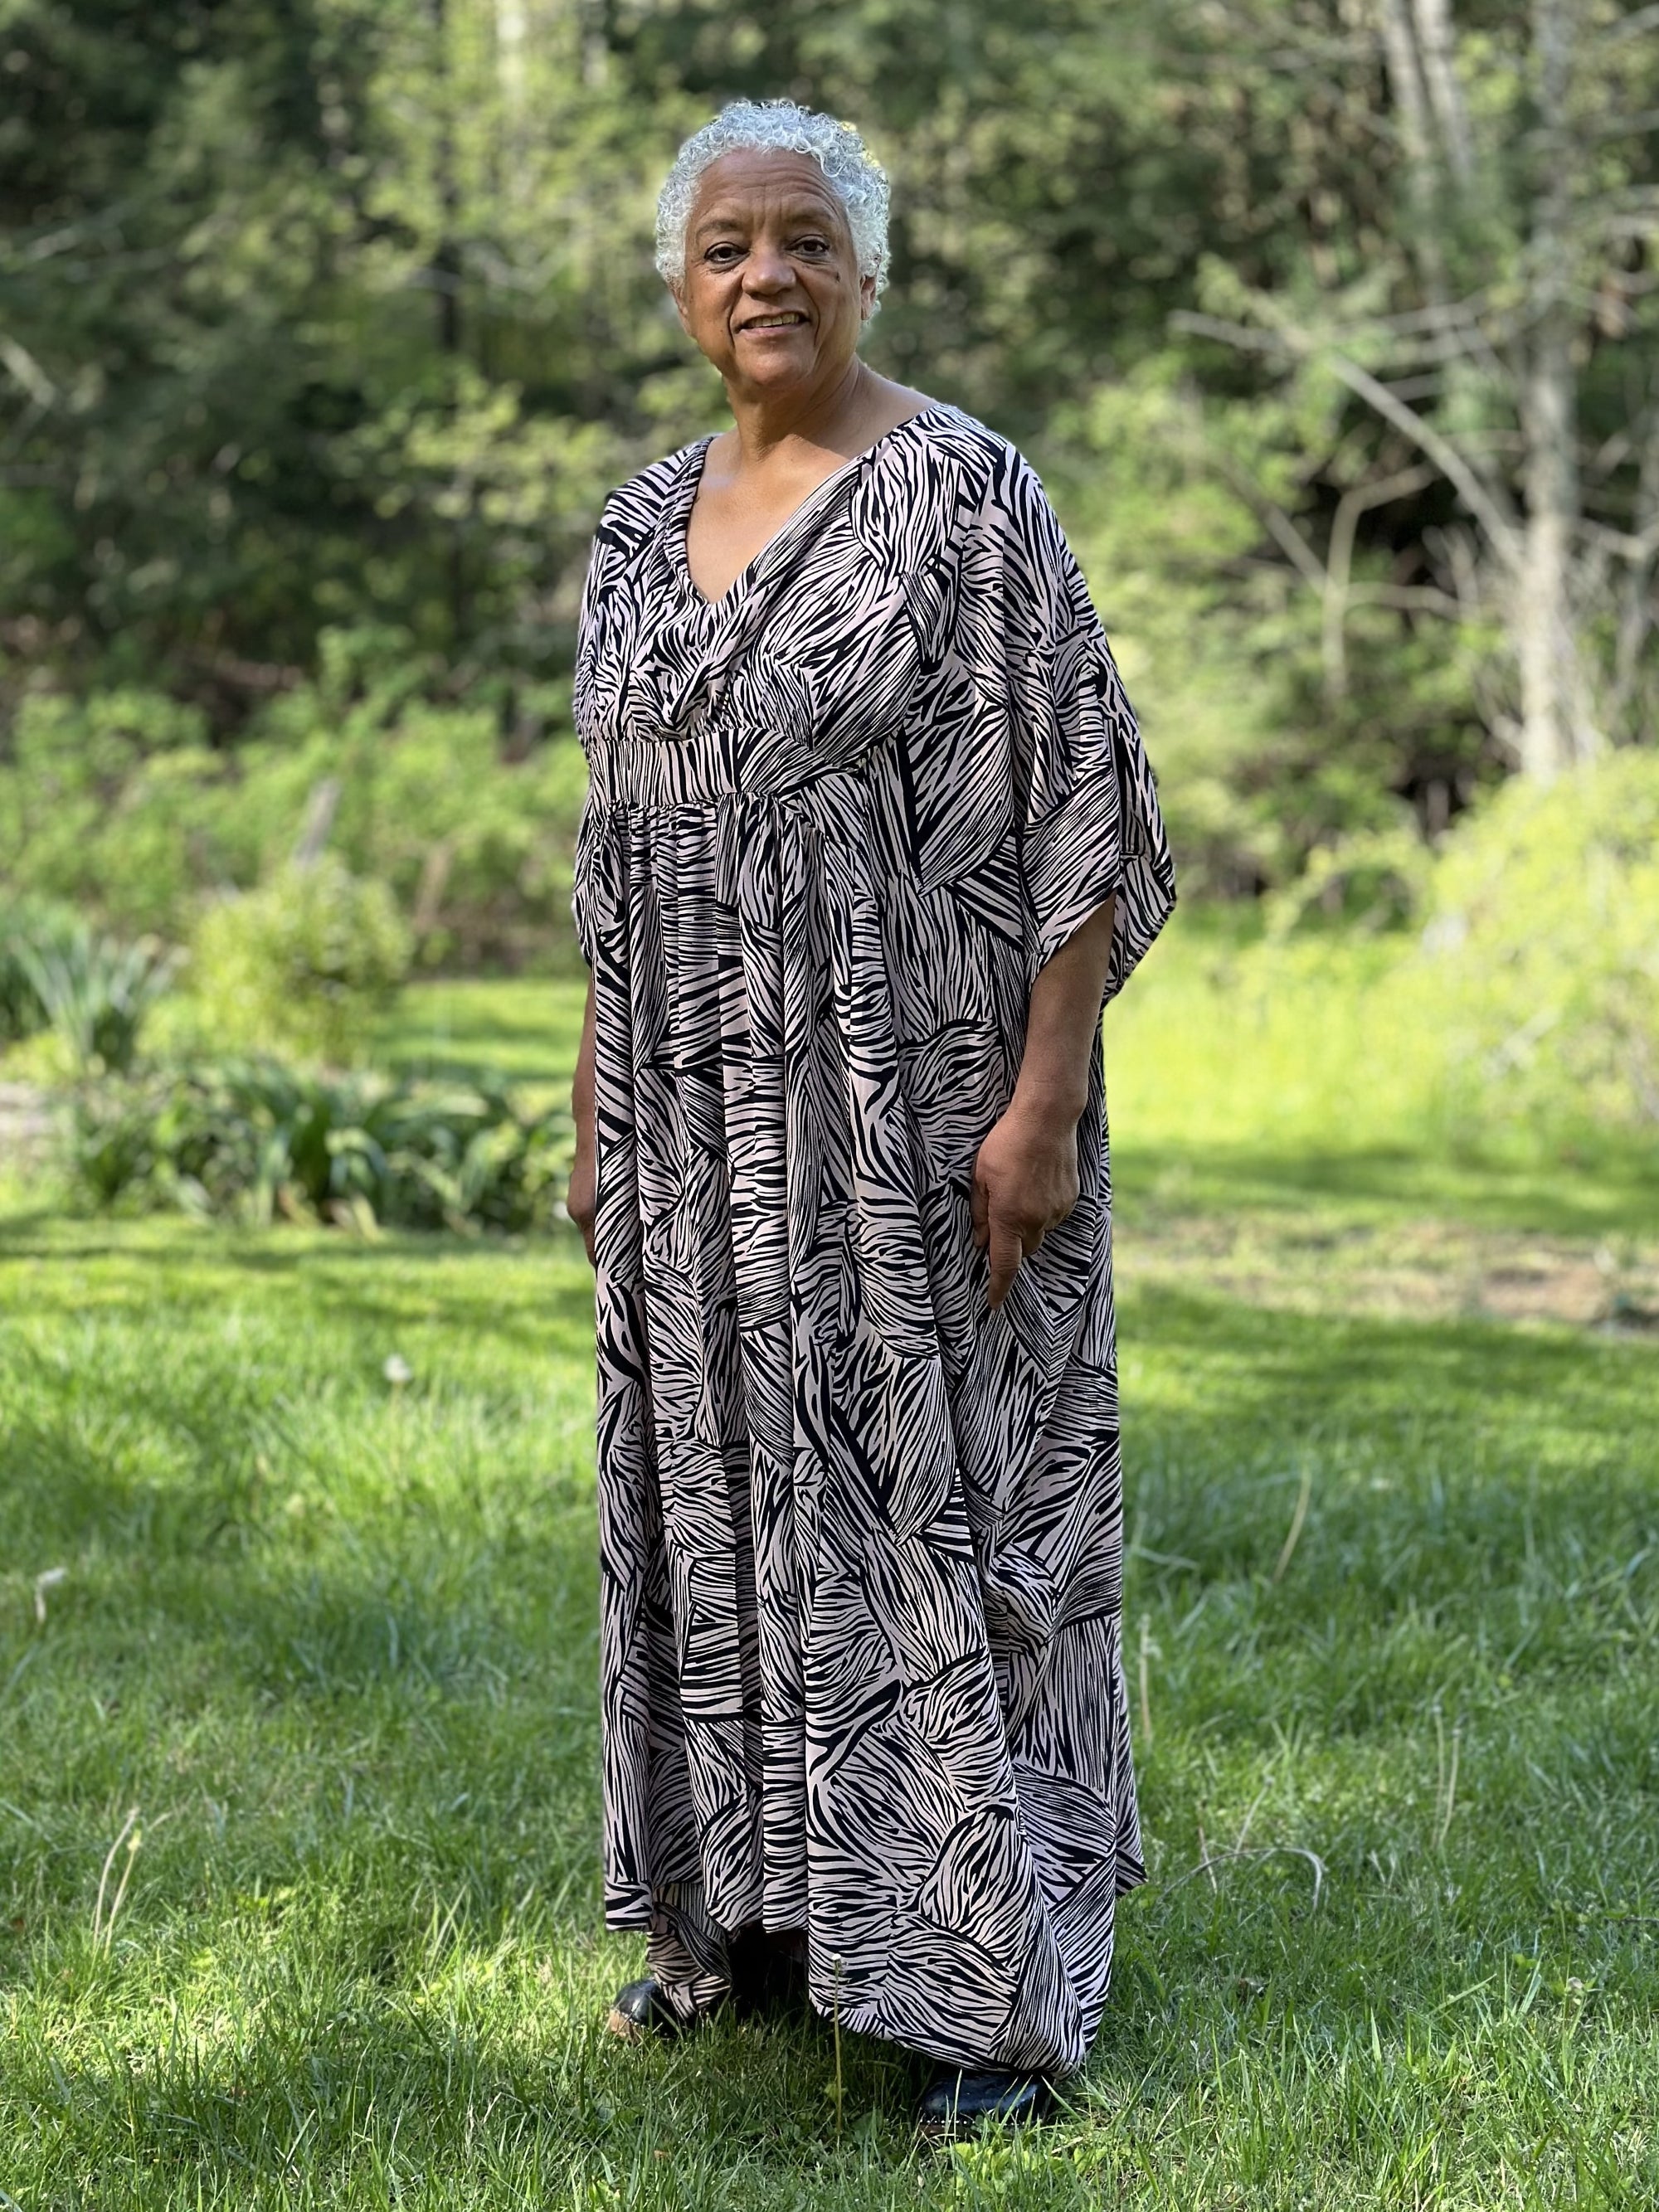 Standing older African American woman wearing Kaftan in a black and pink stripe like print with greenery in the background, with her hand on her hip and the other hand holding out the dress.